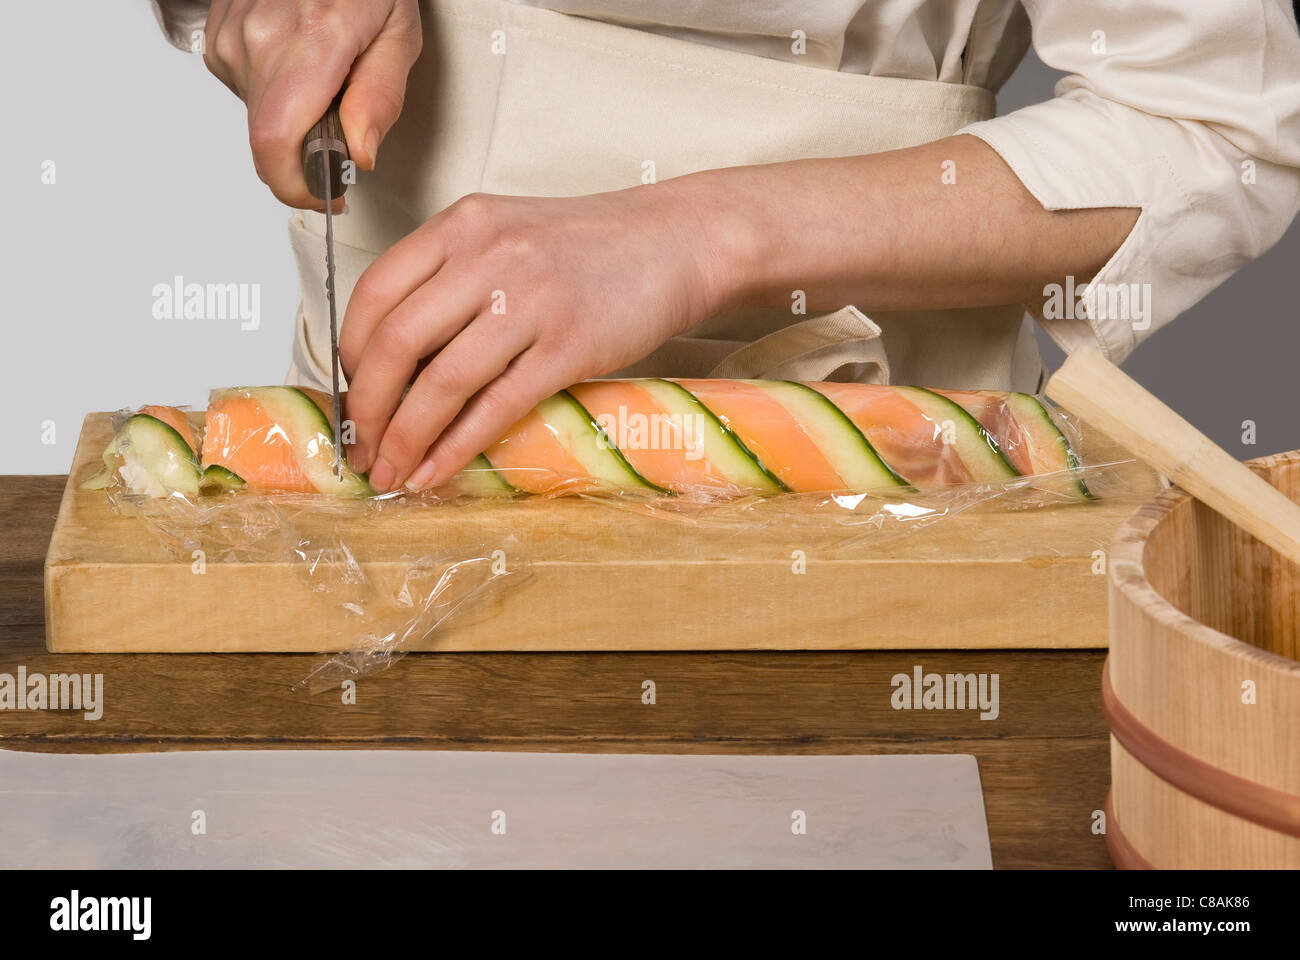 Cook slicing the salmon and cucumber makis Stock Photo